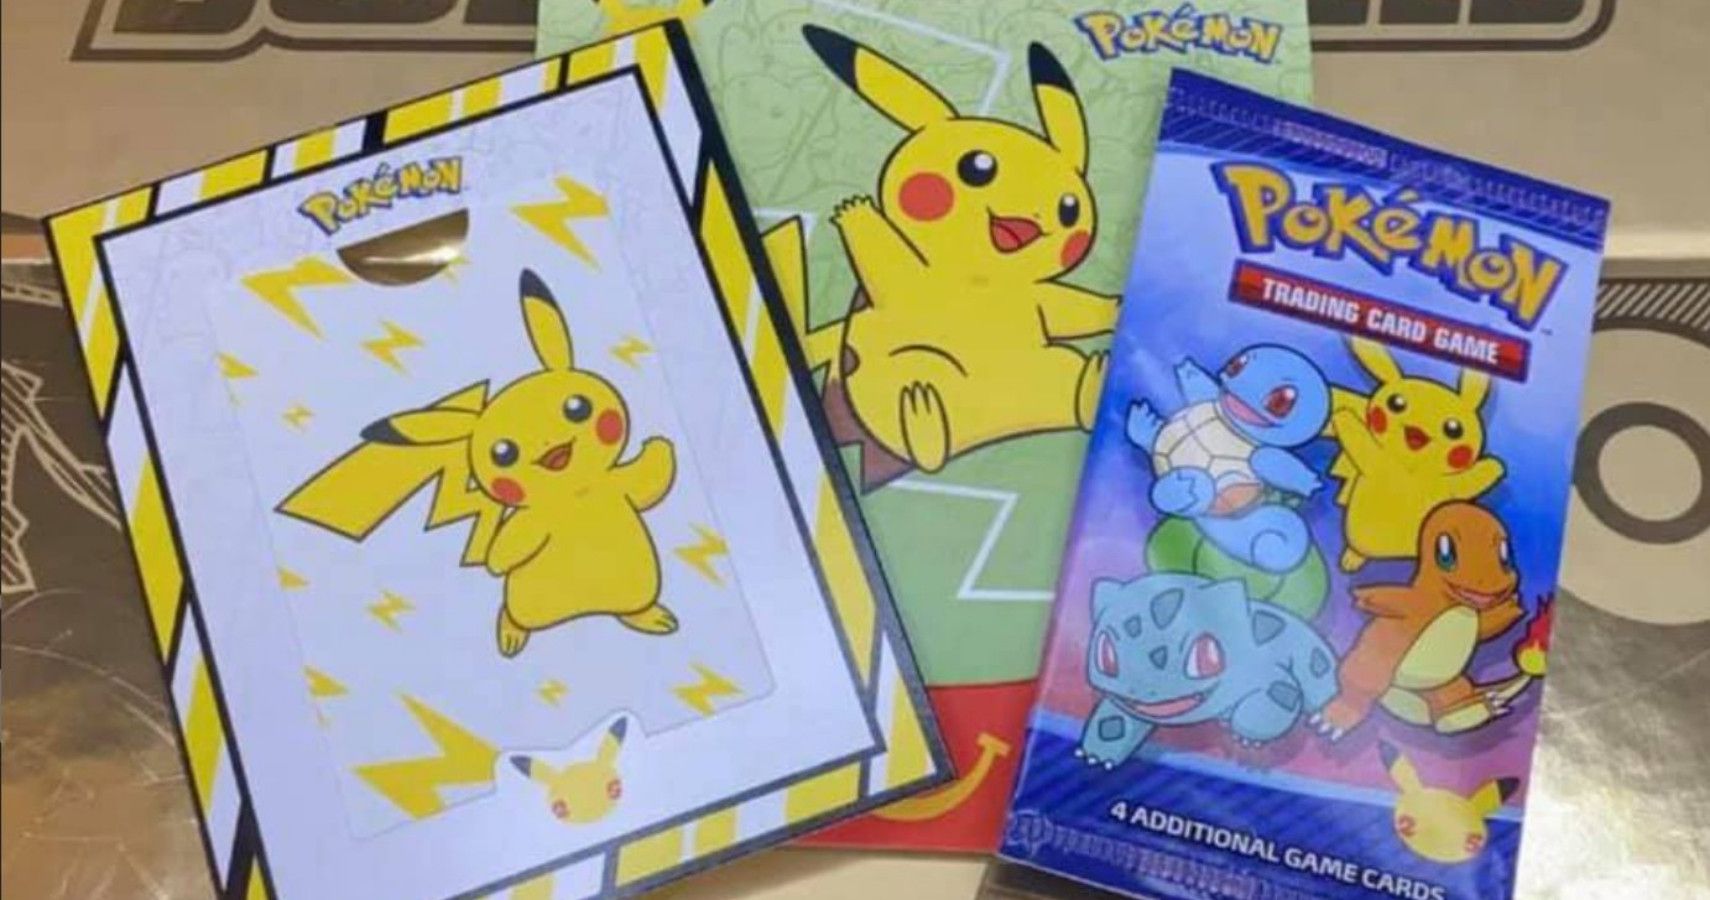 McDonald's Pokemon Cards are Selling Out Because of Scalpers - IGN